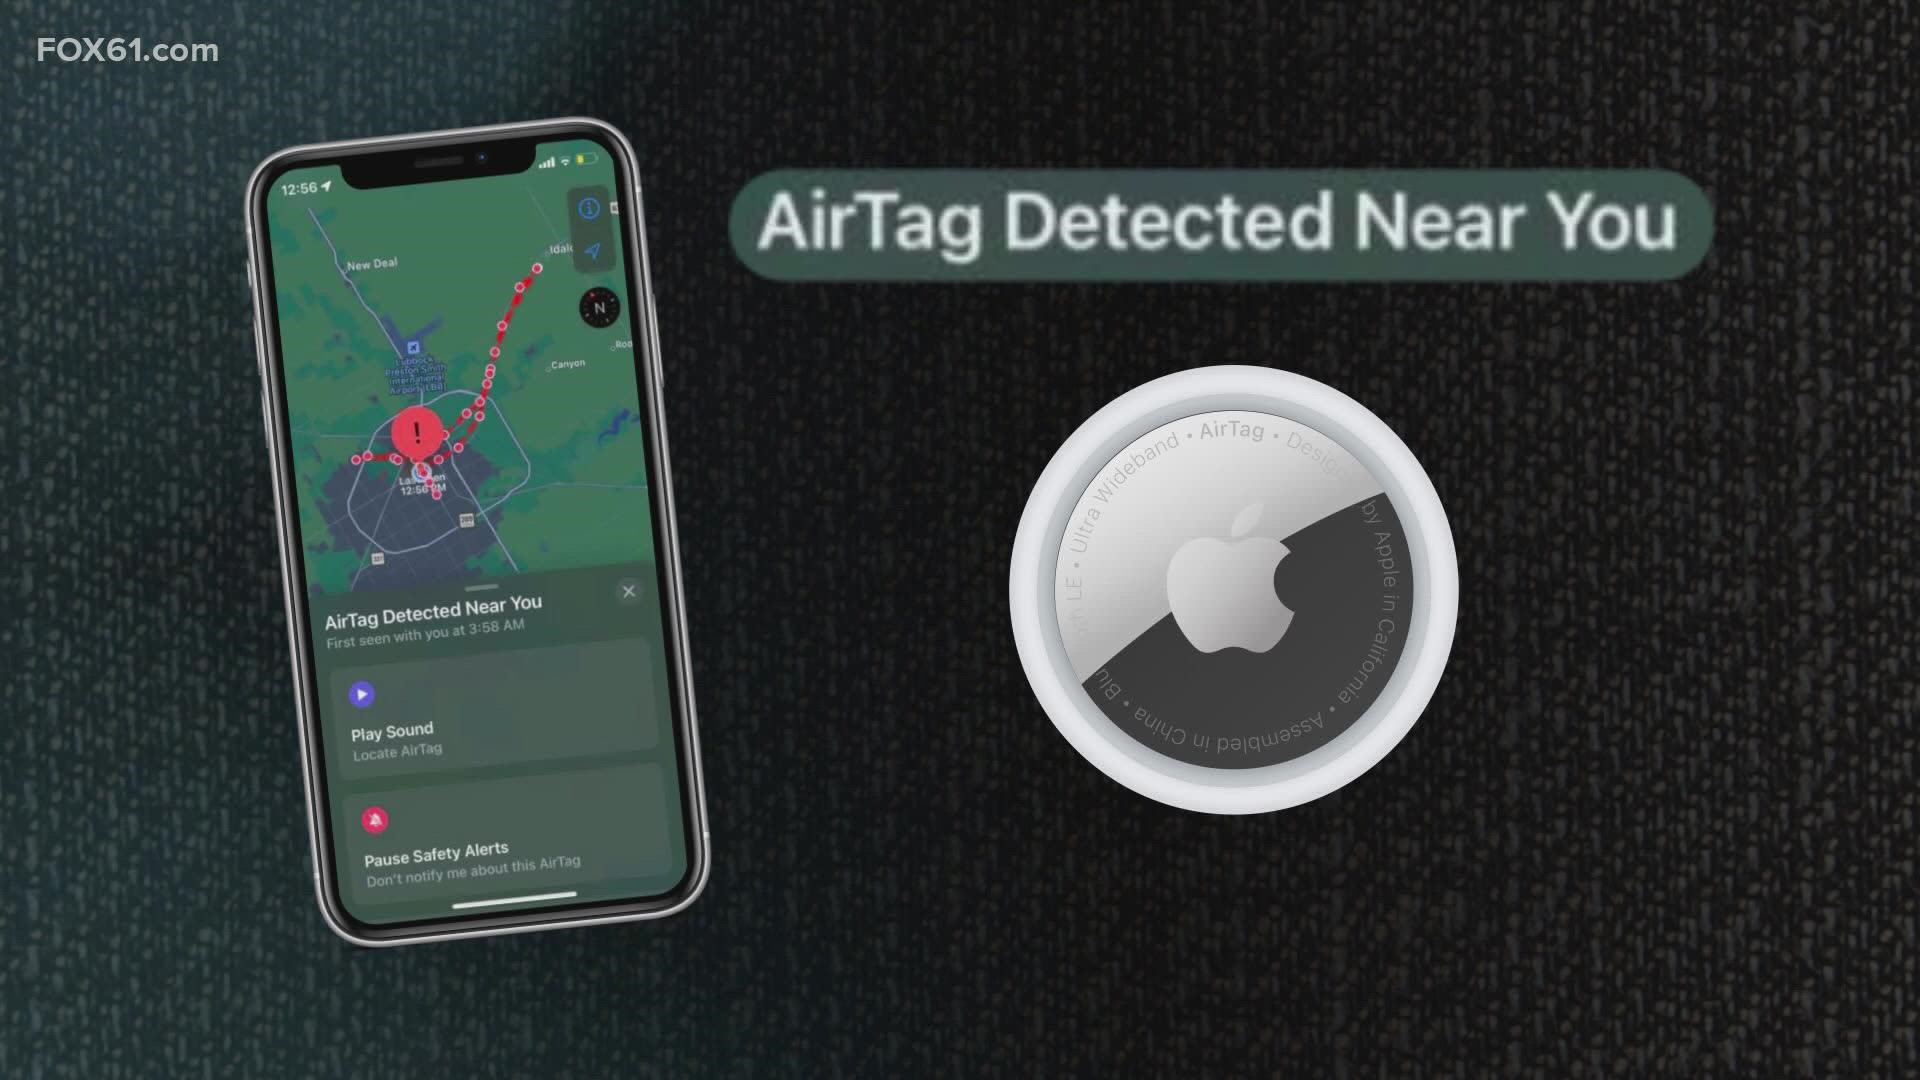 Apple confirms Android devices can also interact with AirTags in Lost Mode